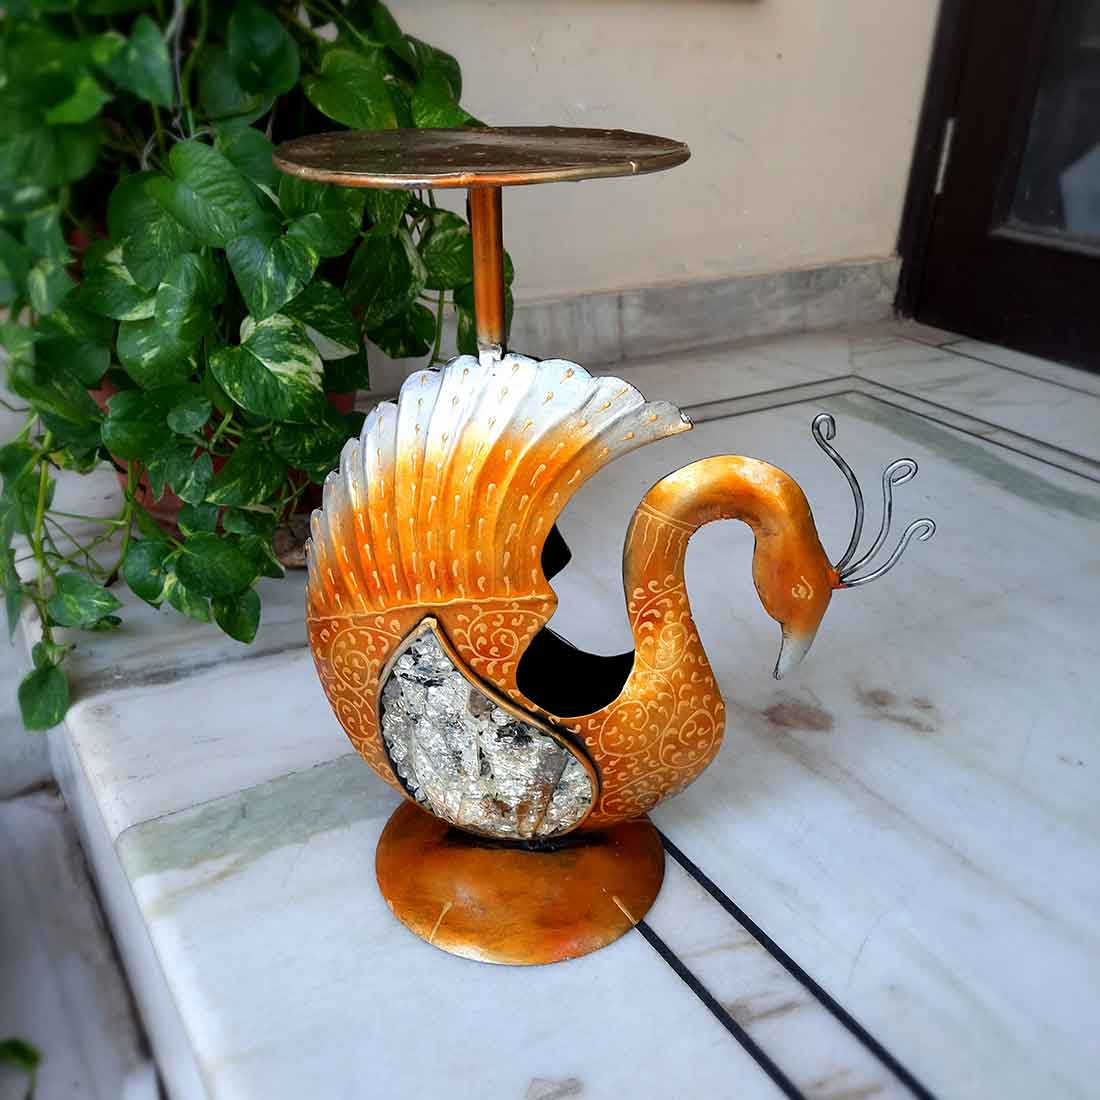 Antique Side Table Swan Design - 15 Inch for Home and Corner Decor - ApkaMartSide Table Peacock Design | End Table Cum Showpiece - for Living Room, Home and Corner Decor & Gift - 15 Inch - apkamart #Color_Brown